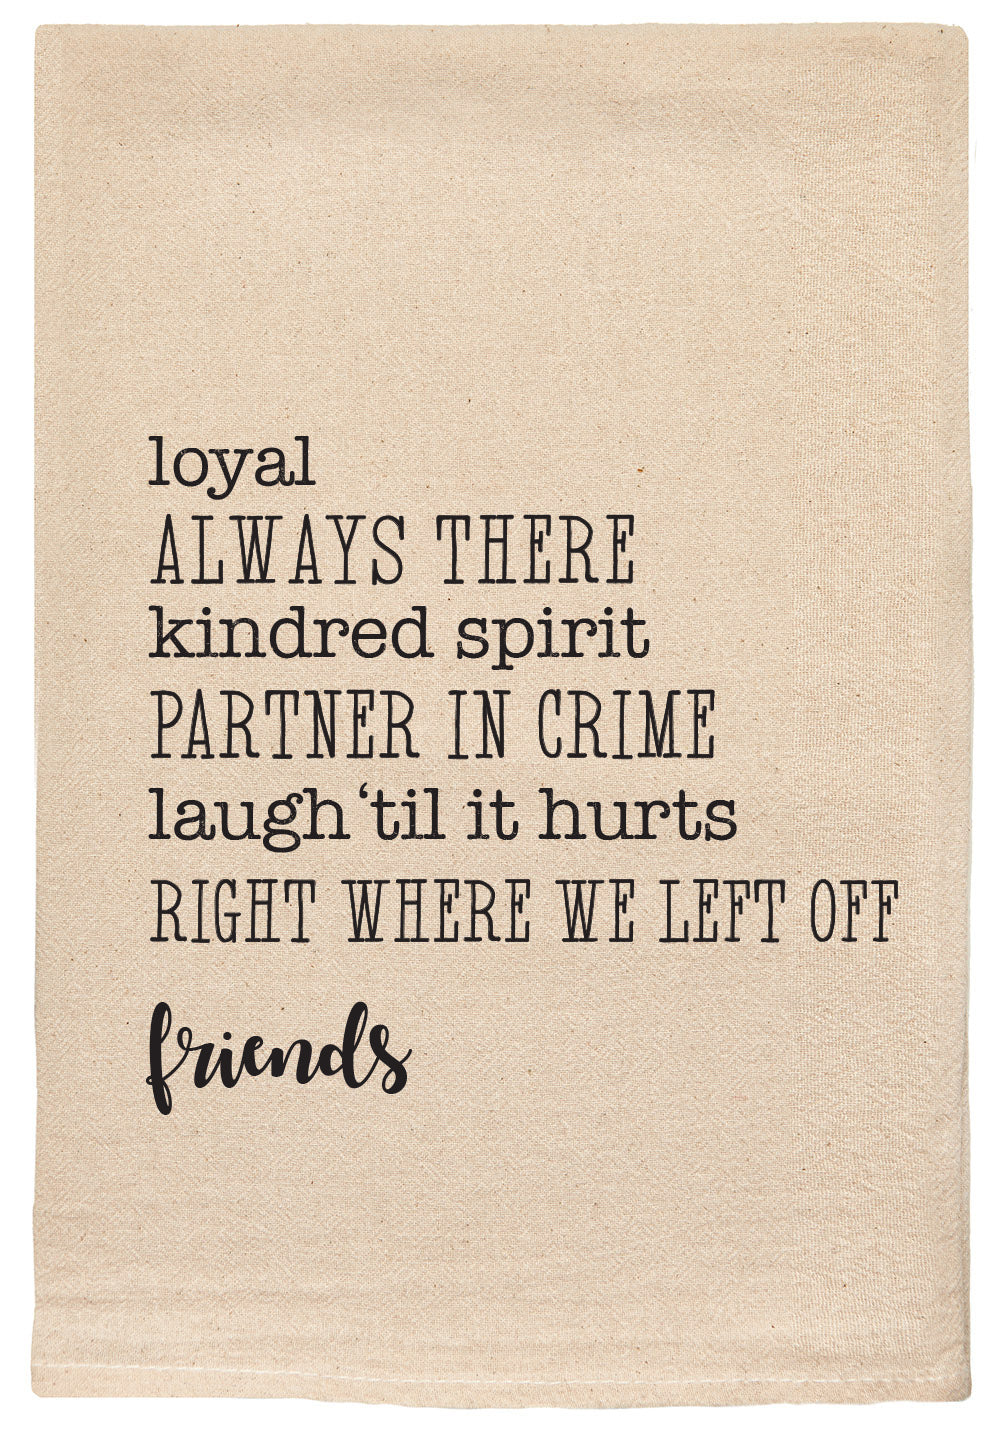 Loyal | Always there | partner in crime | Friends Favorite Things Kitchen Towel